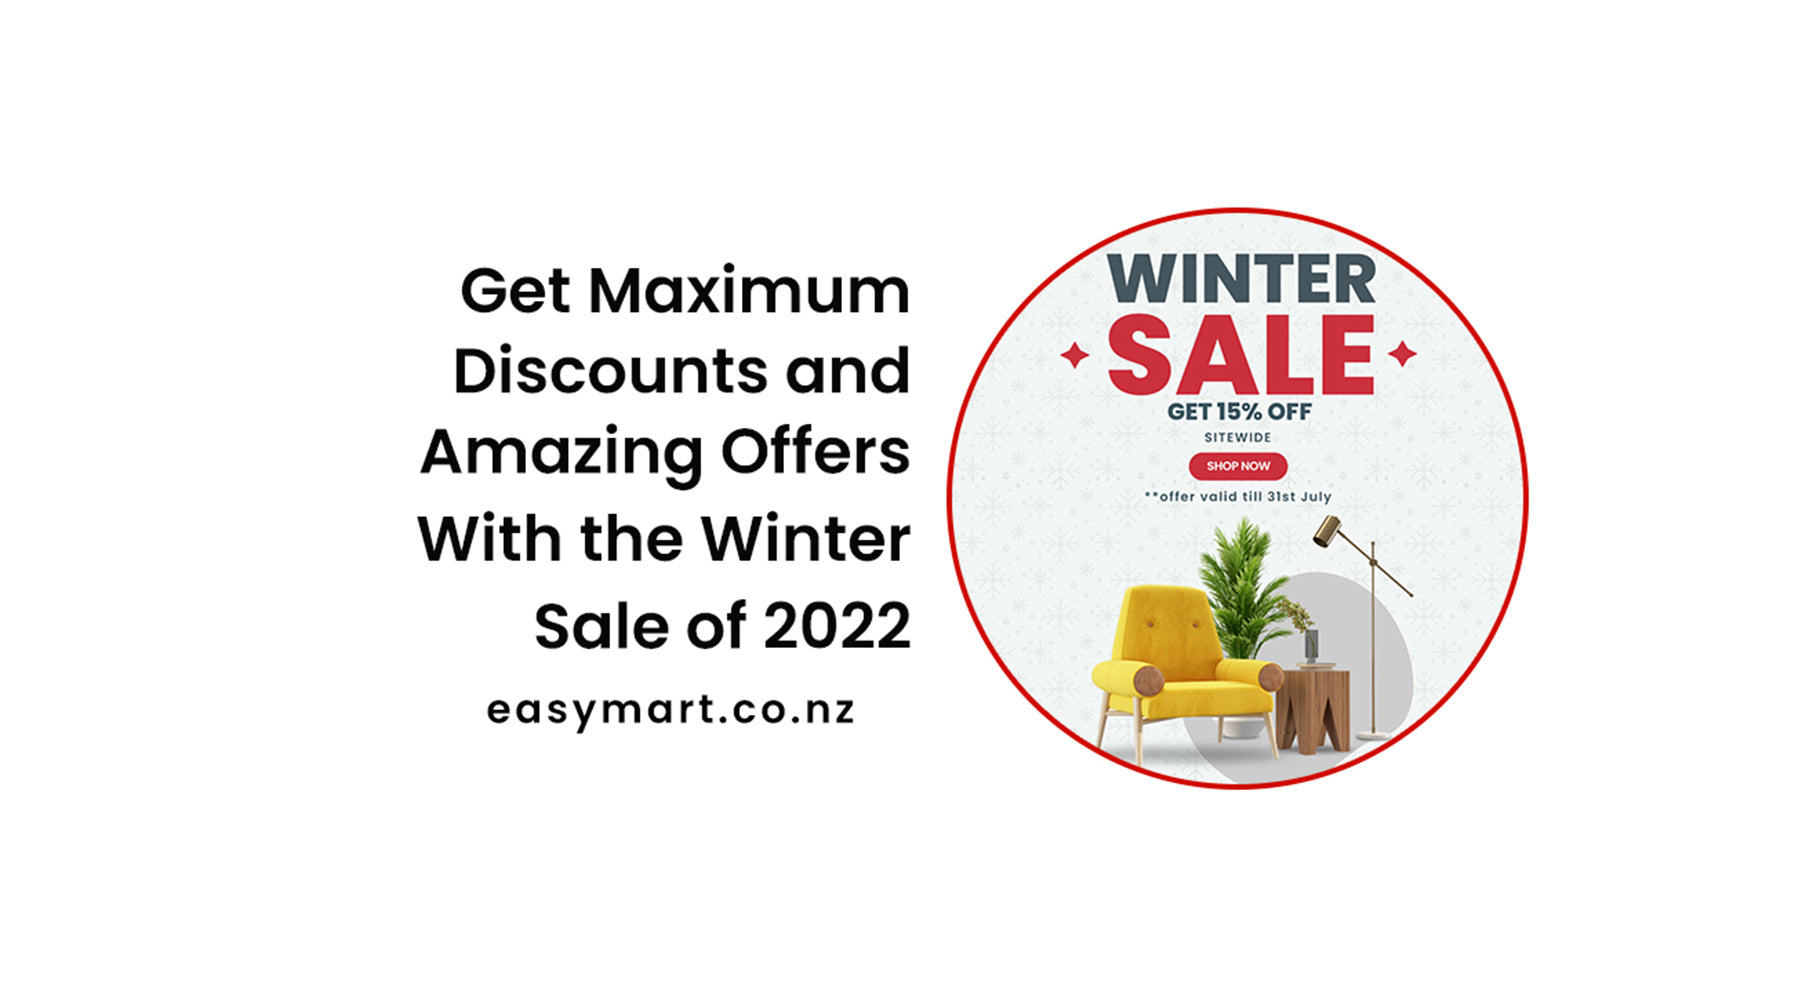 Get Maximum Discounts and Amazing Offers With the Winter Sale of 2023